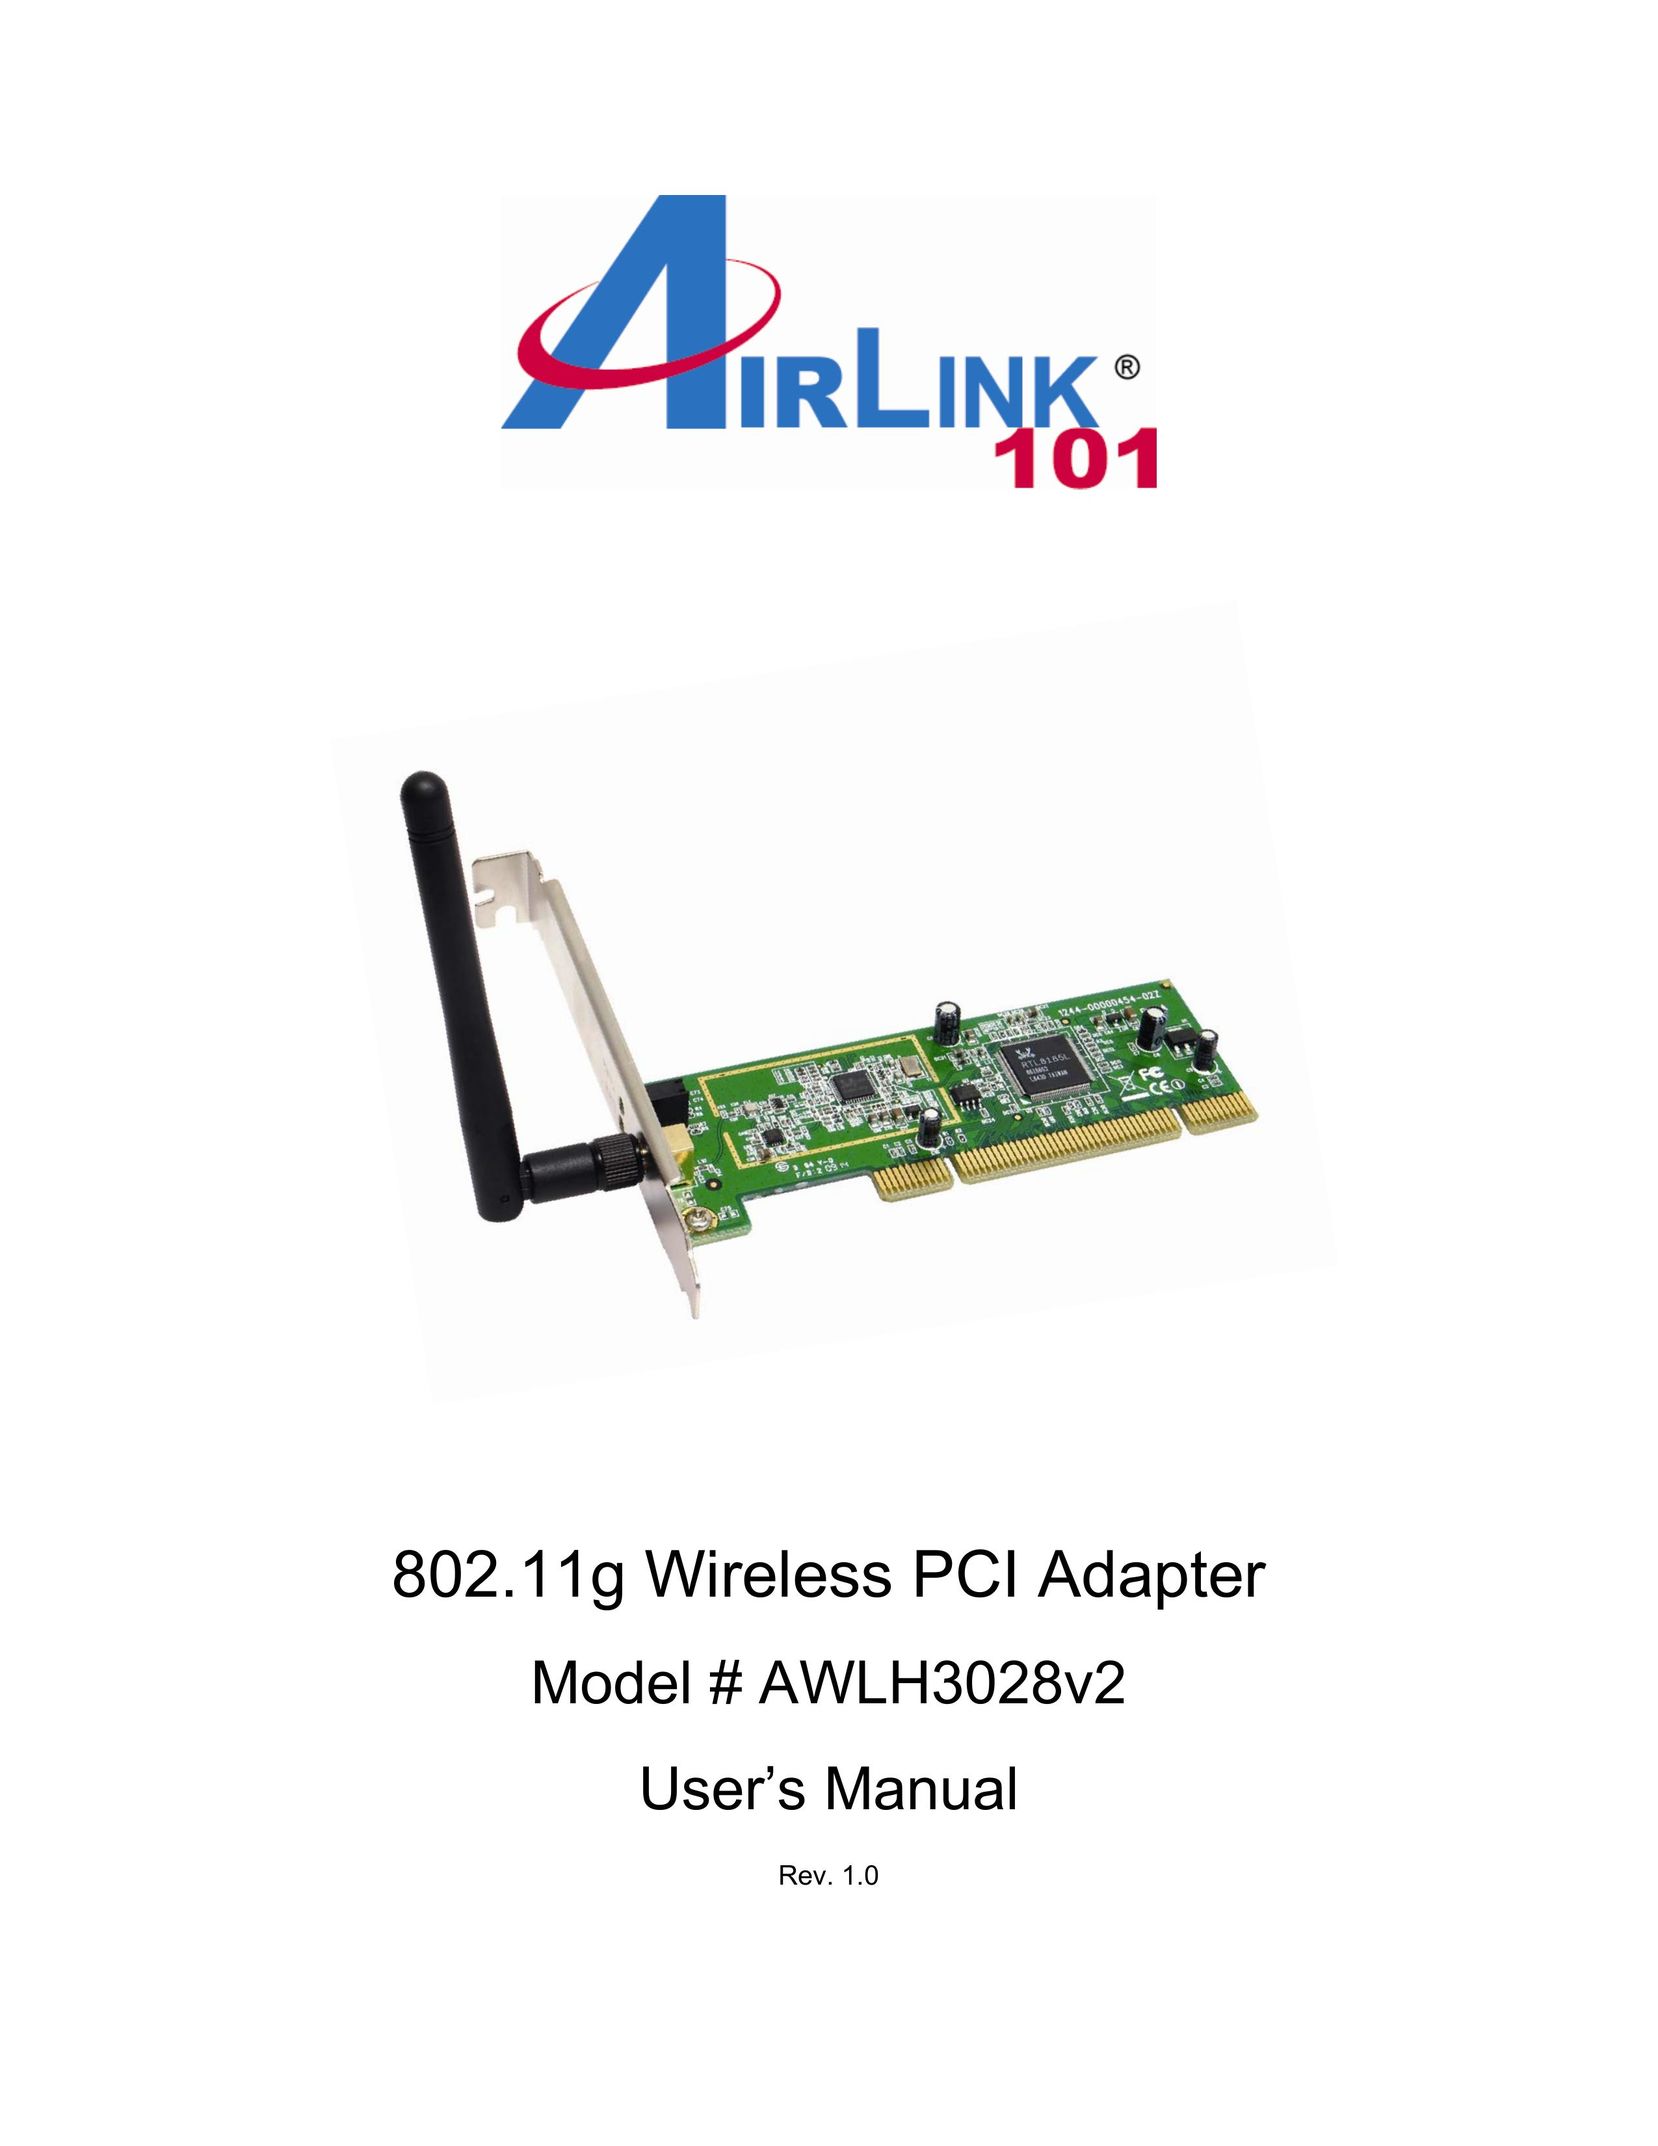 Airlink101 AWLH3028V2 Computer Hardware User Manual